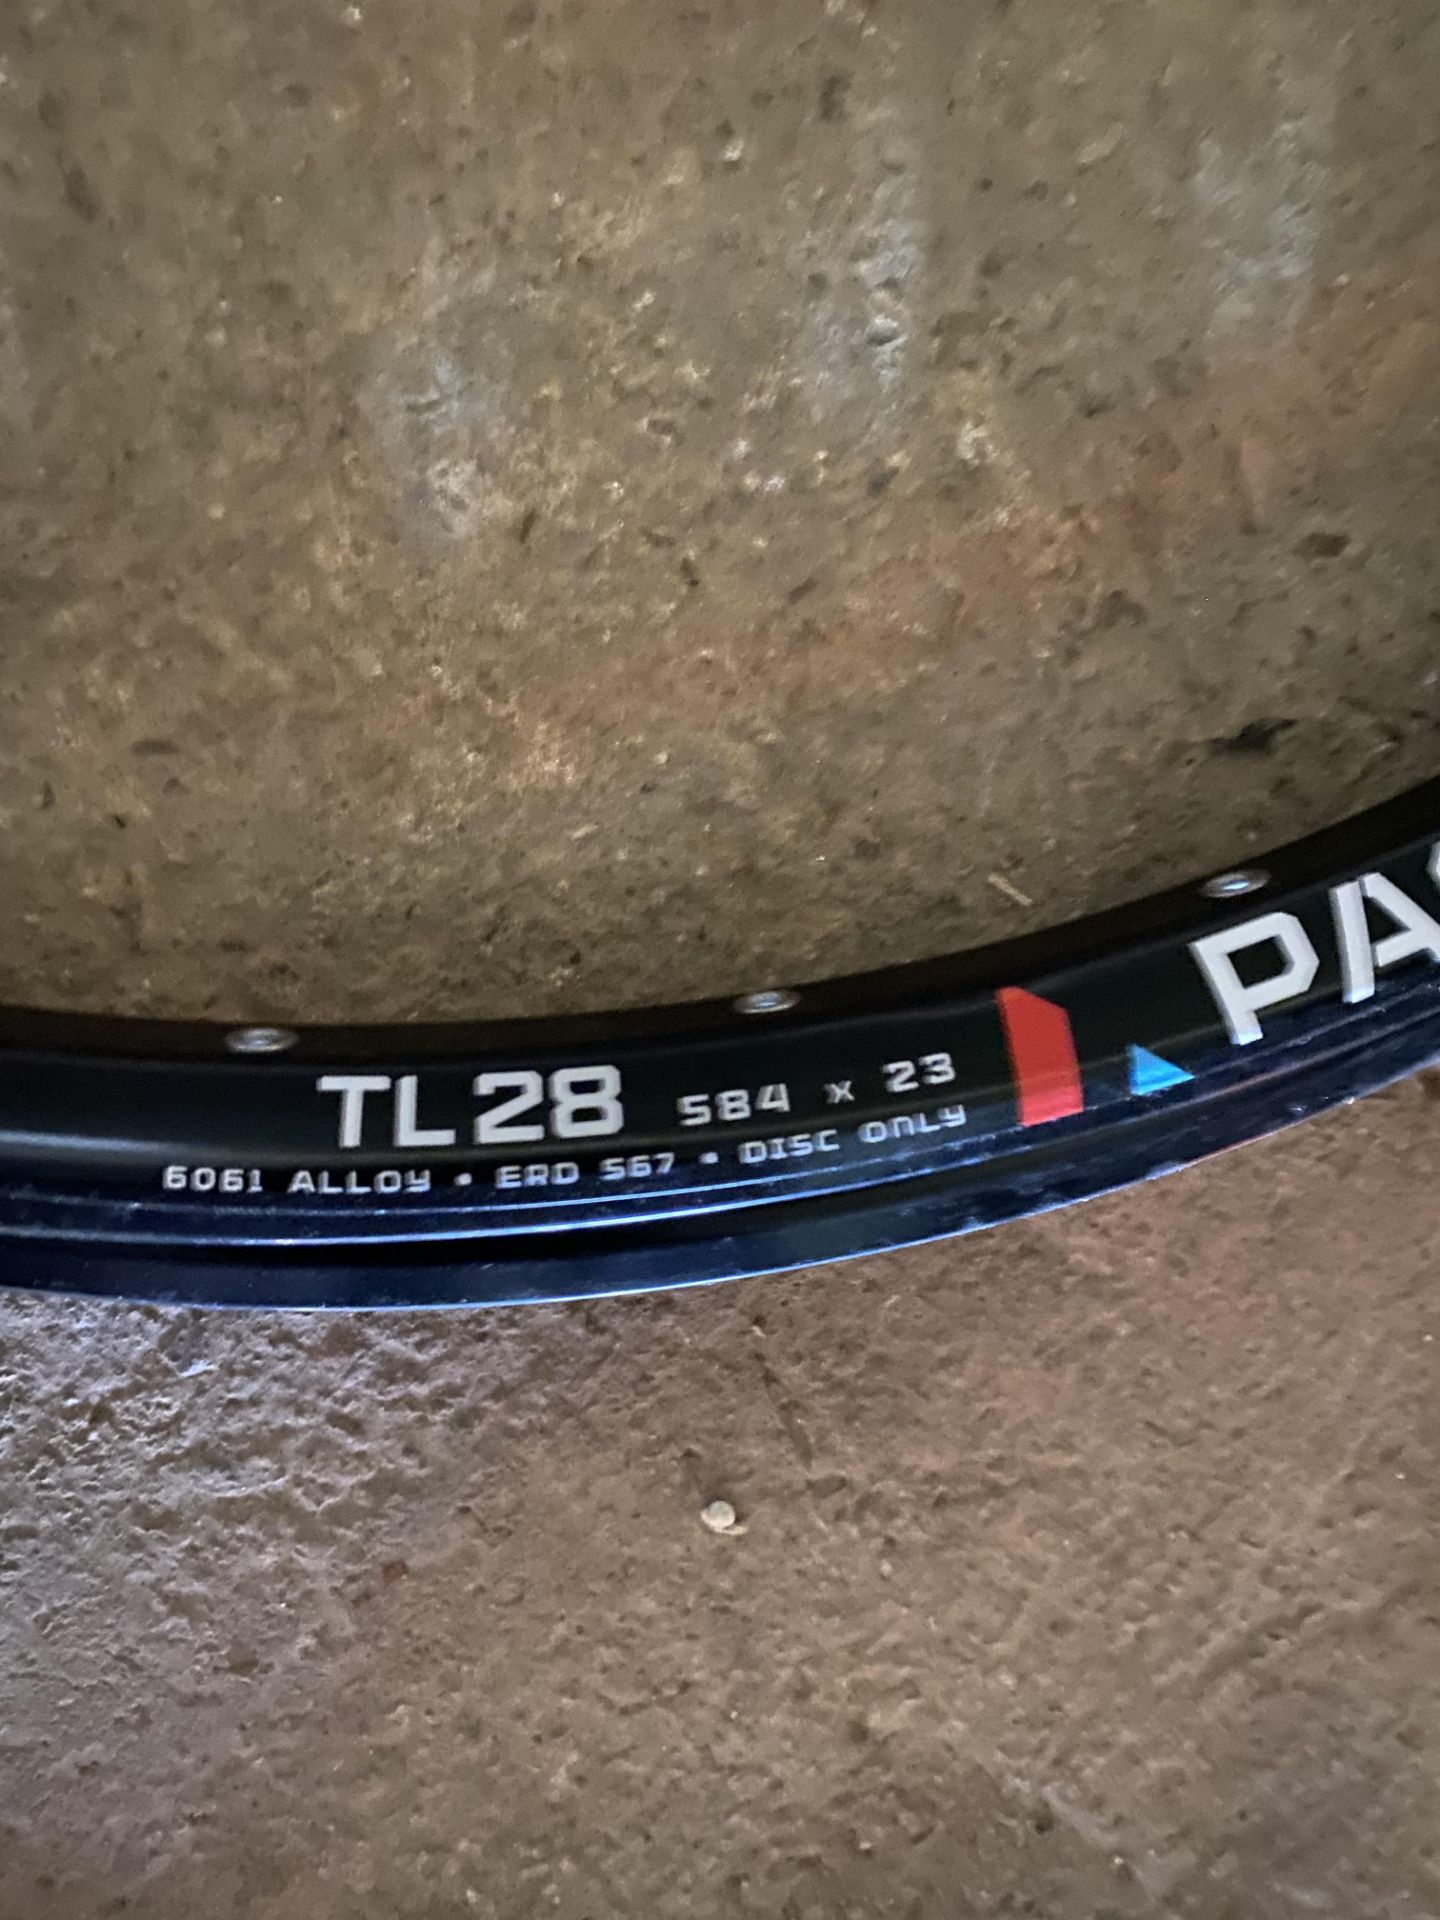 Pair of Pacenti TL28 6061 alloys, 584 x 23 - Image 2 of 3